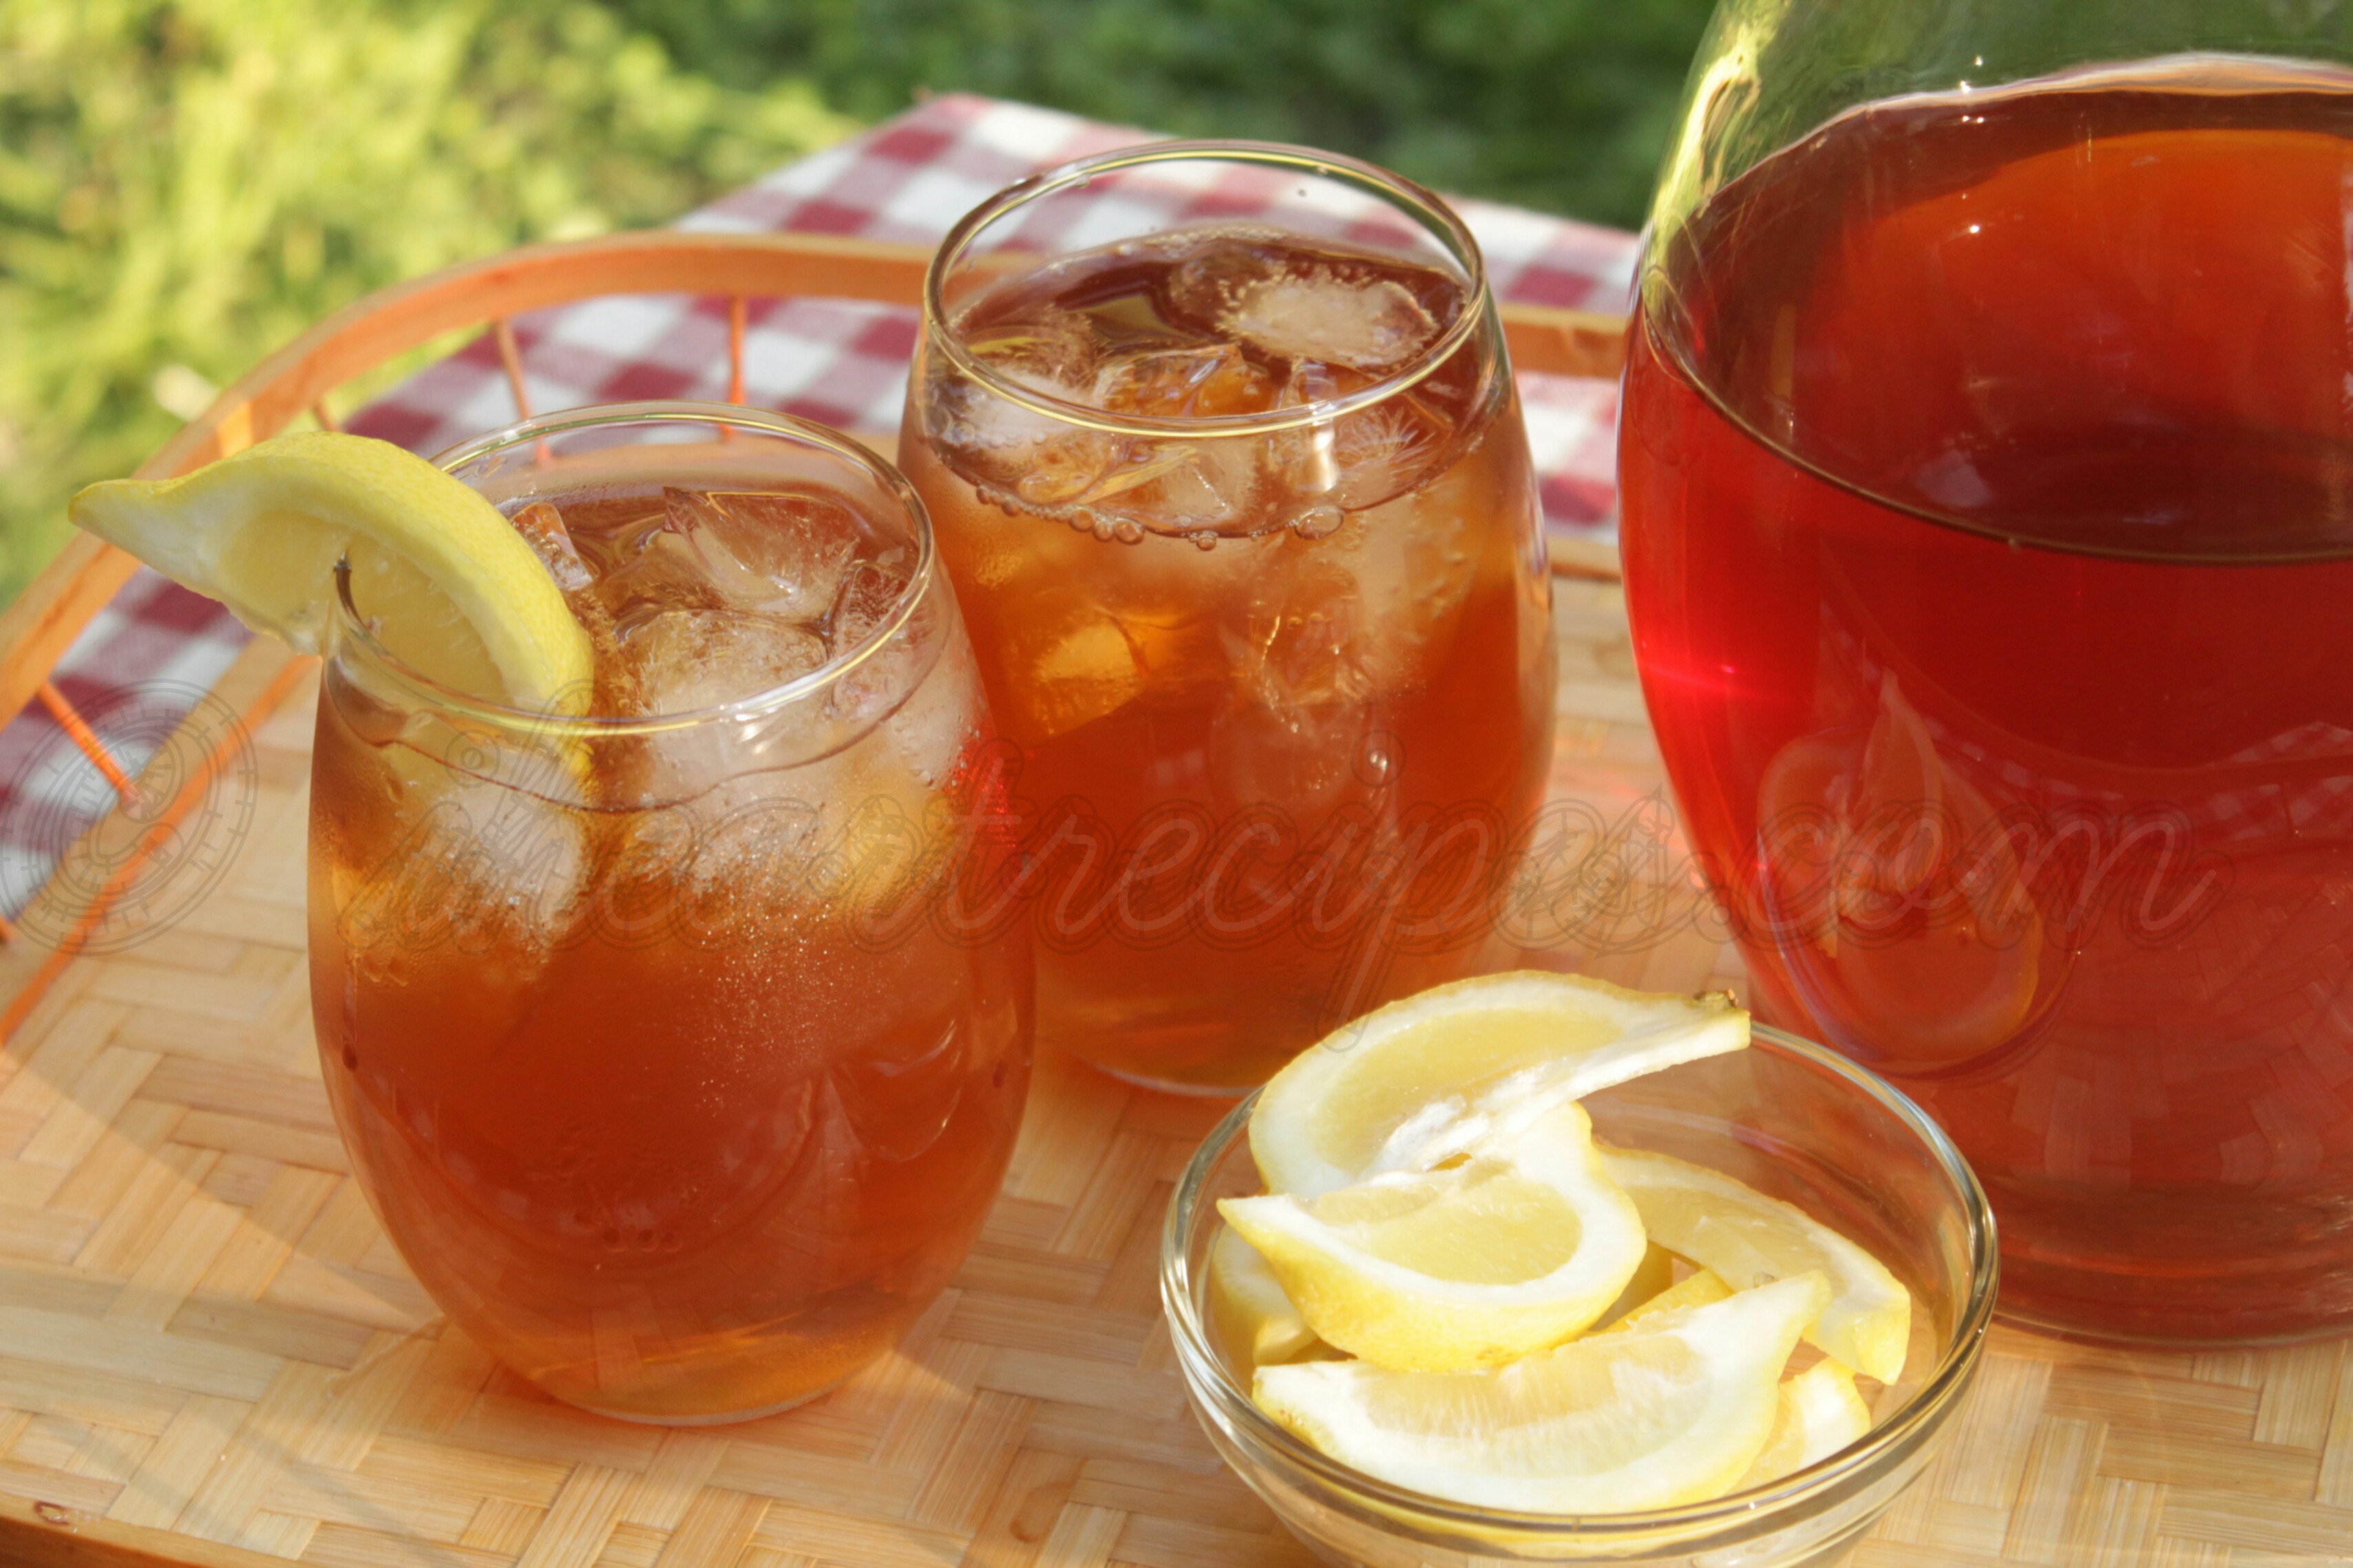 This classic and refreshing sweet tea is the perfect summer drink for a hot day out on the porch